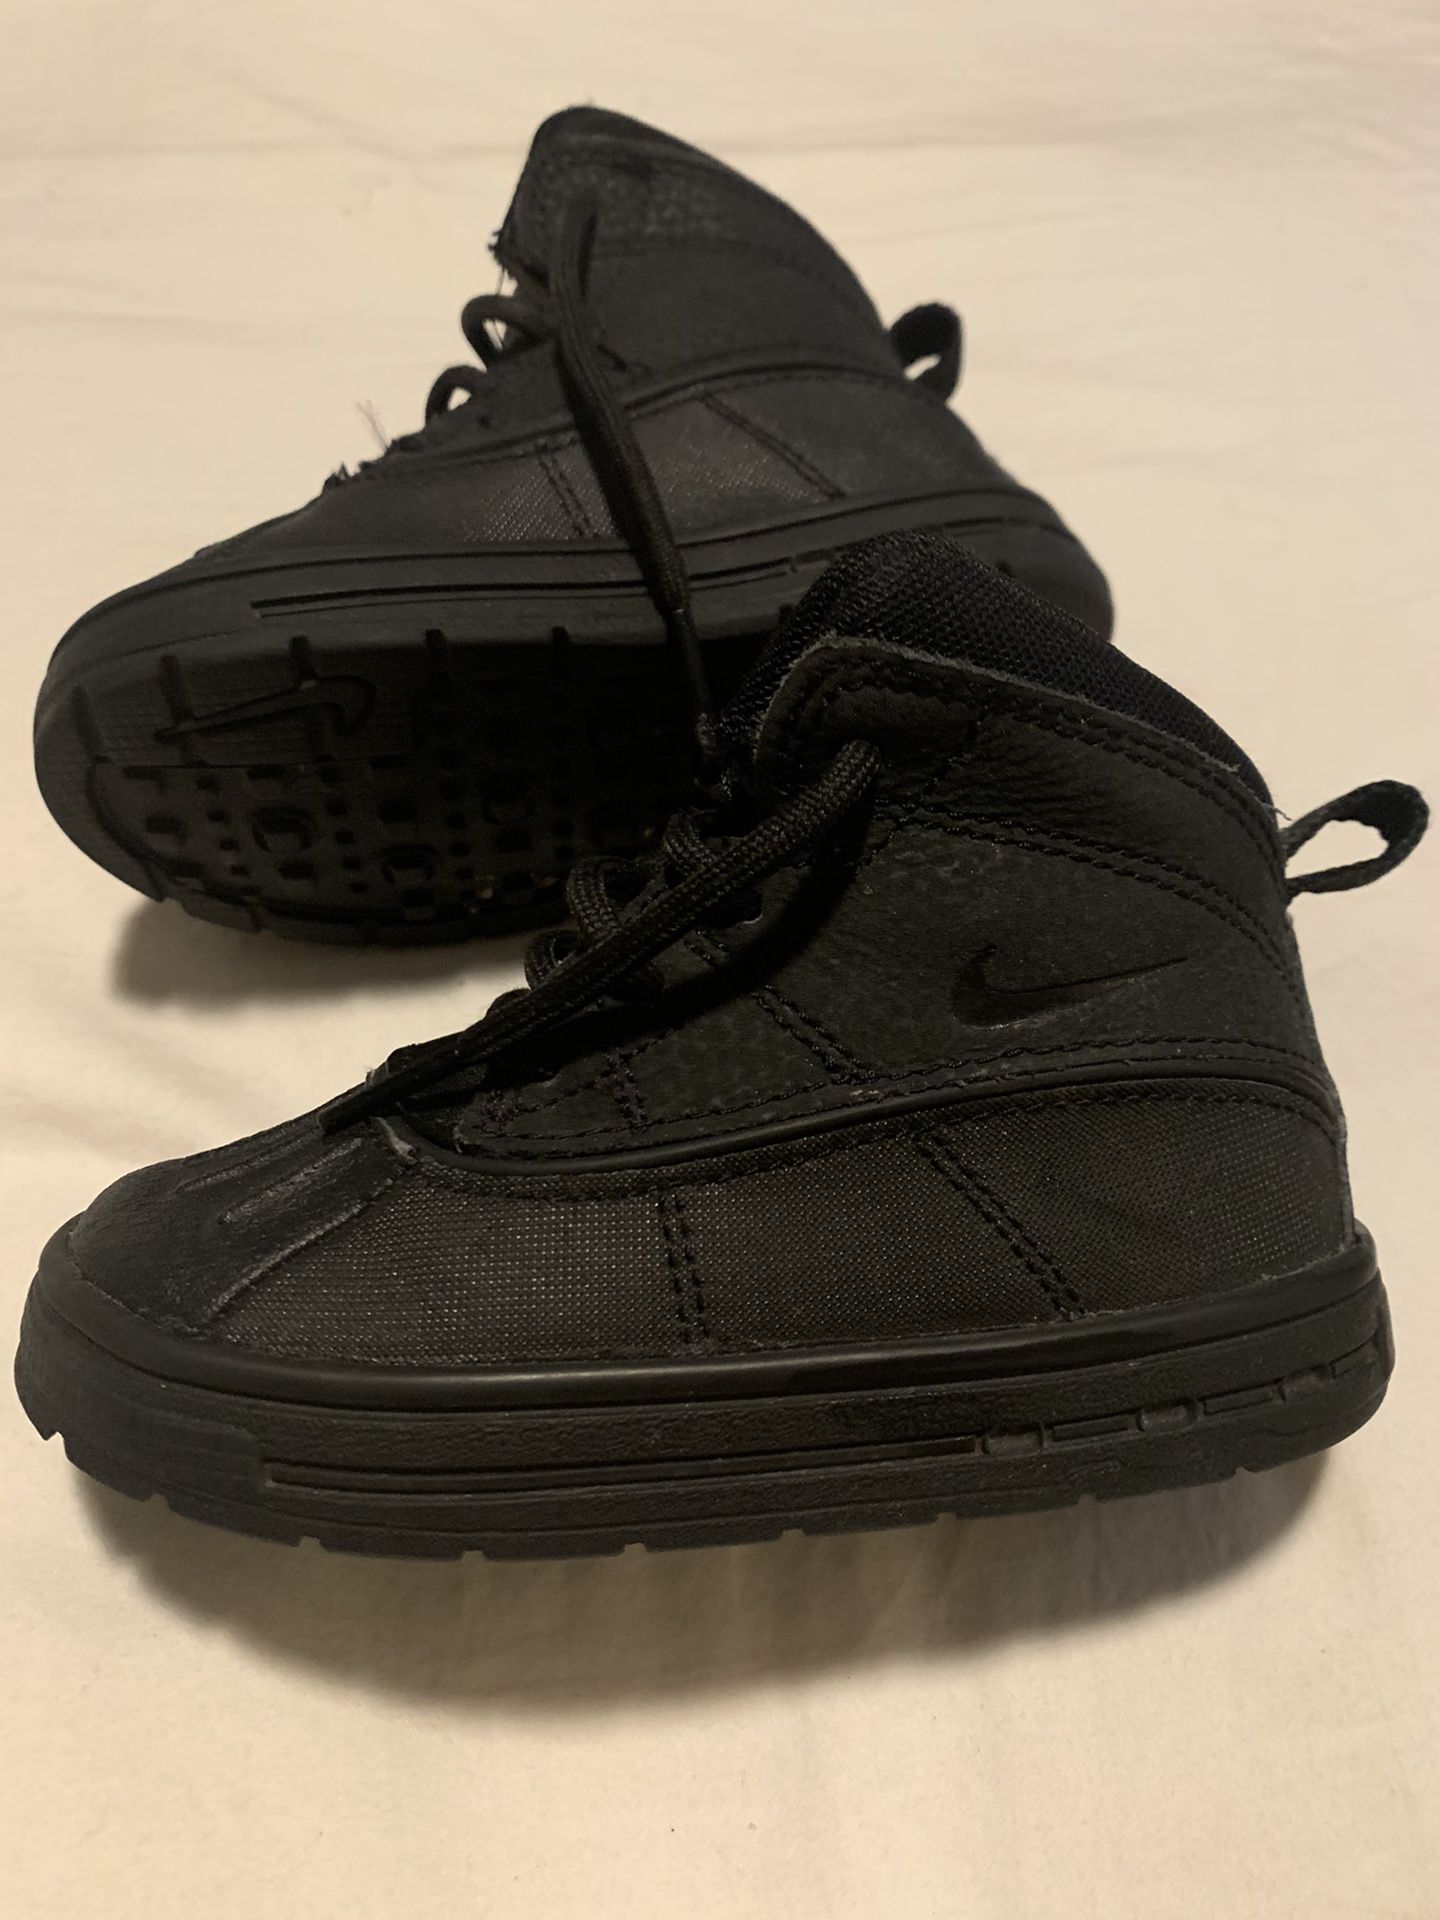 Nike Toddler Boots! Perfect For Snow. Size 7!